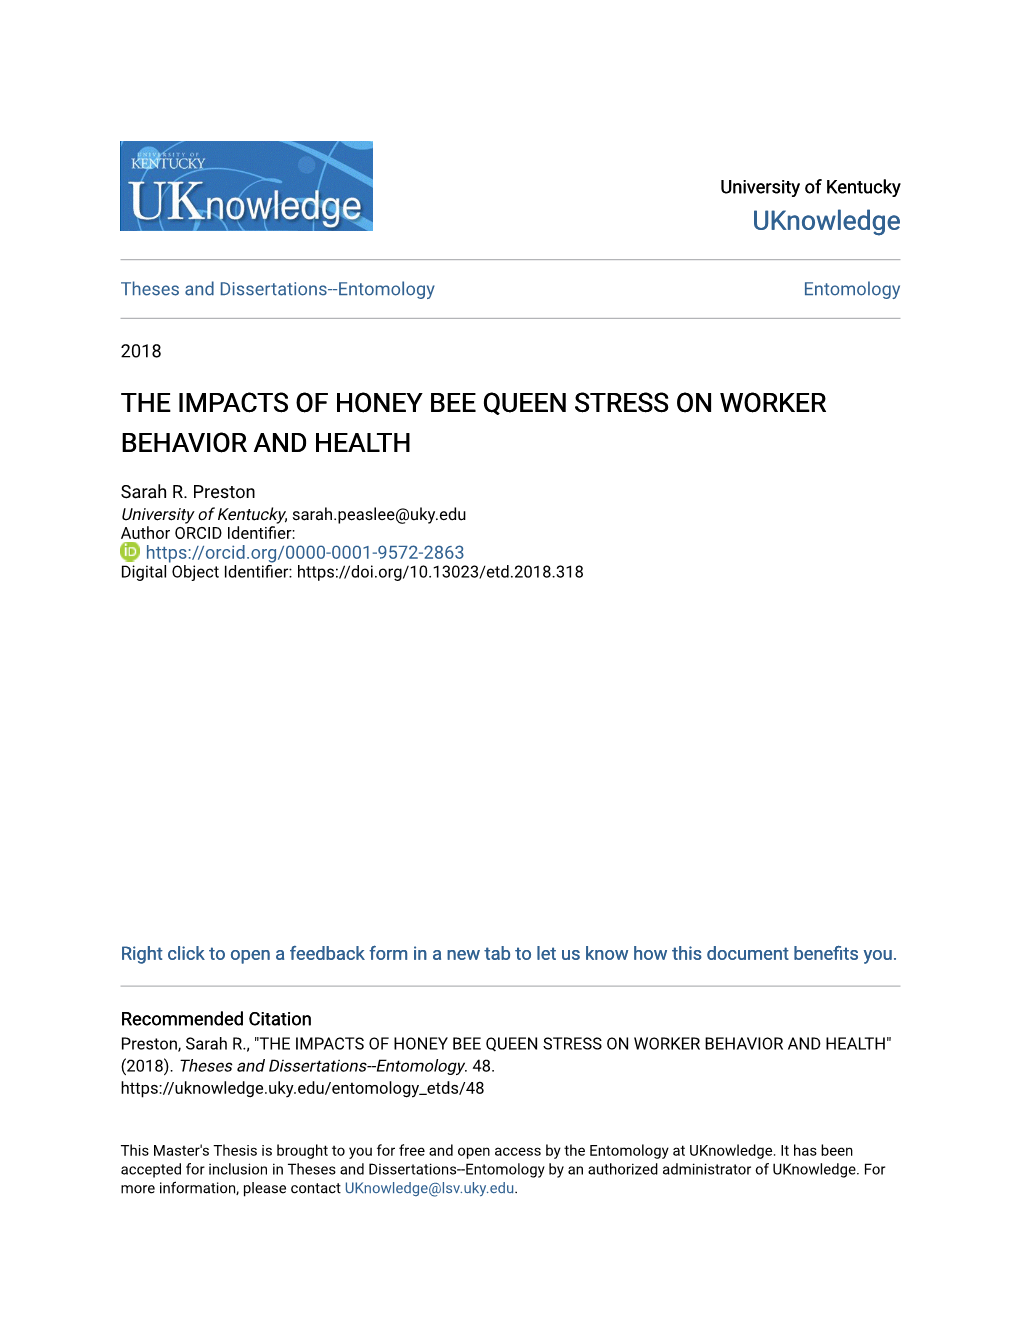 The Impacts of Honey Bee Queen Stress on Worker Behavior and Health